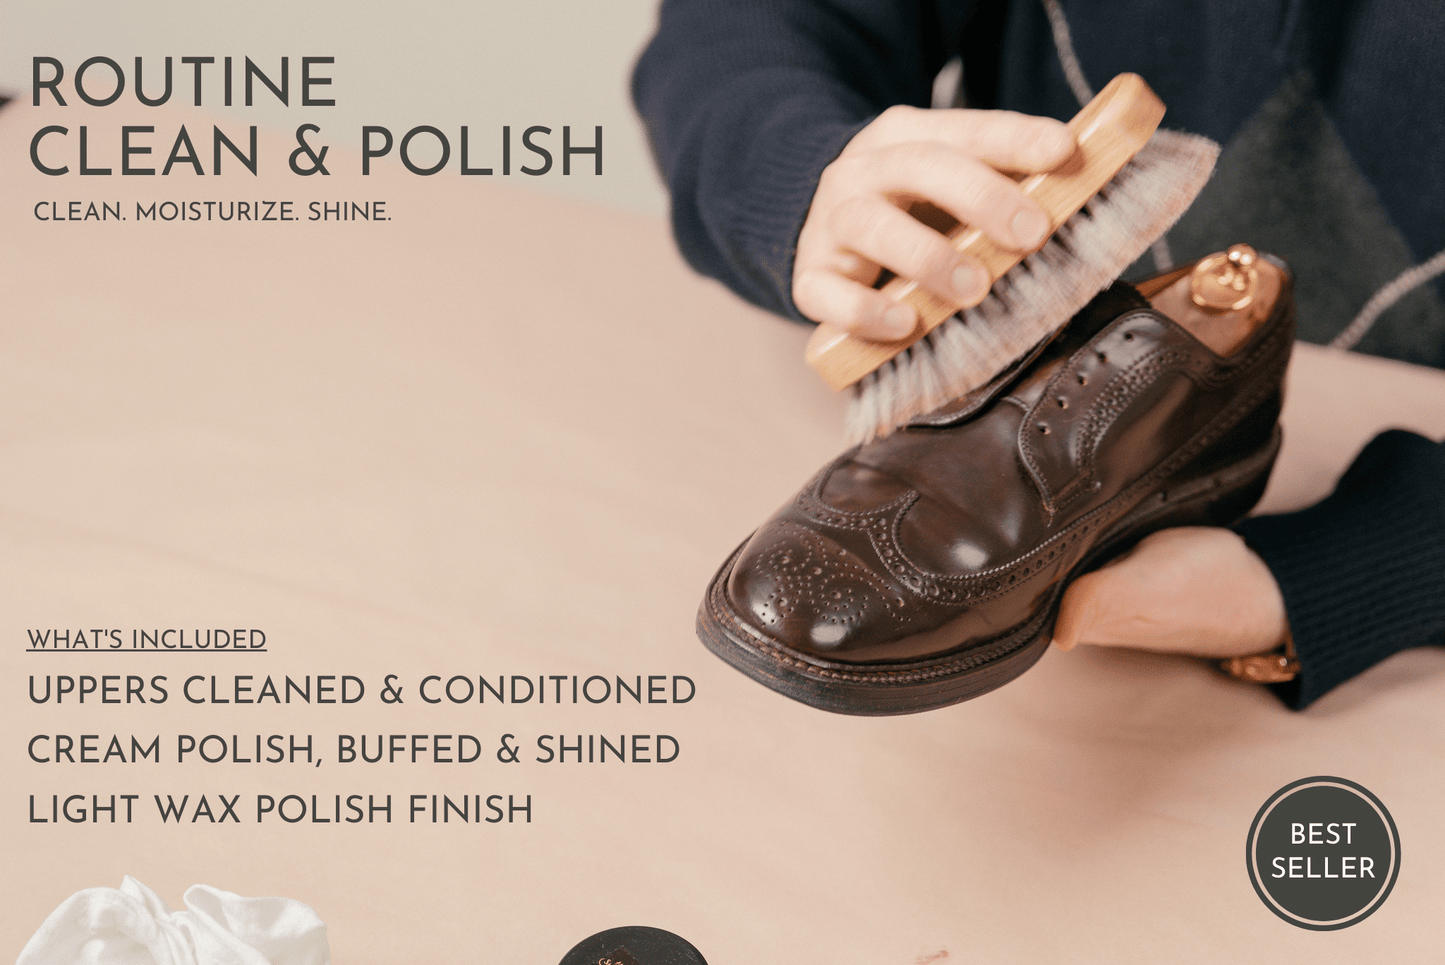 Brillaré Routine Shoe Clean & Polish - Alden 975 Longwing cordovan blucher being cleaned and buffed with Saphir Wooden Horse hair shoe shine brush